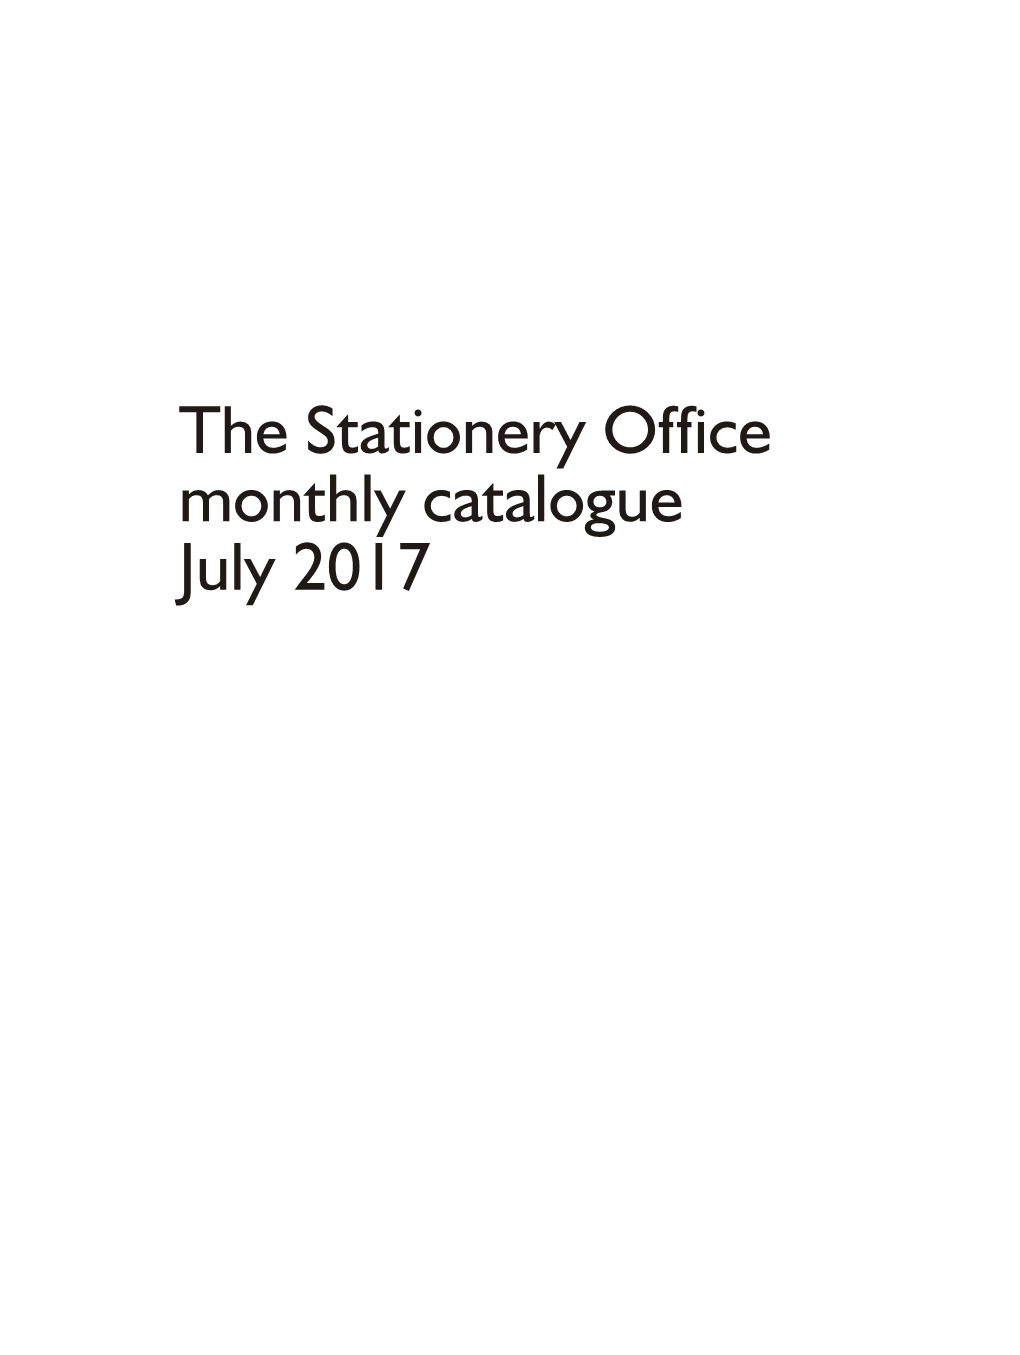 The Stationery Office Monthly Catalogue July 2017 Ii